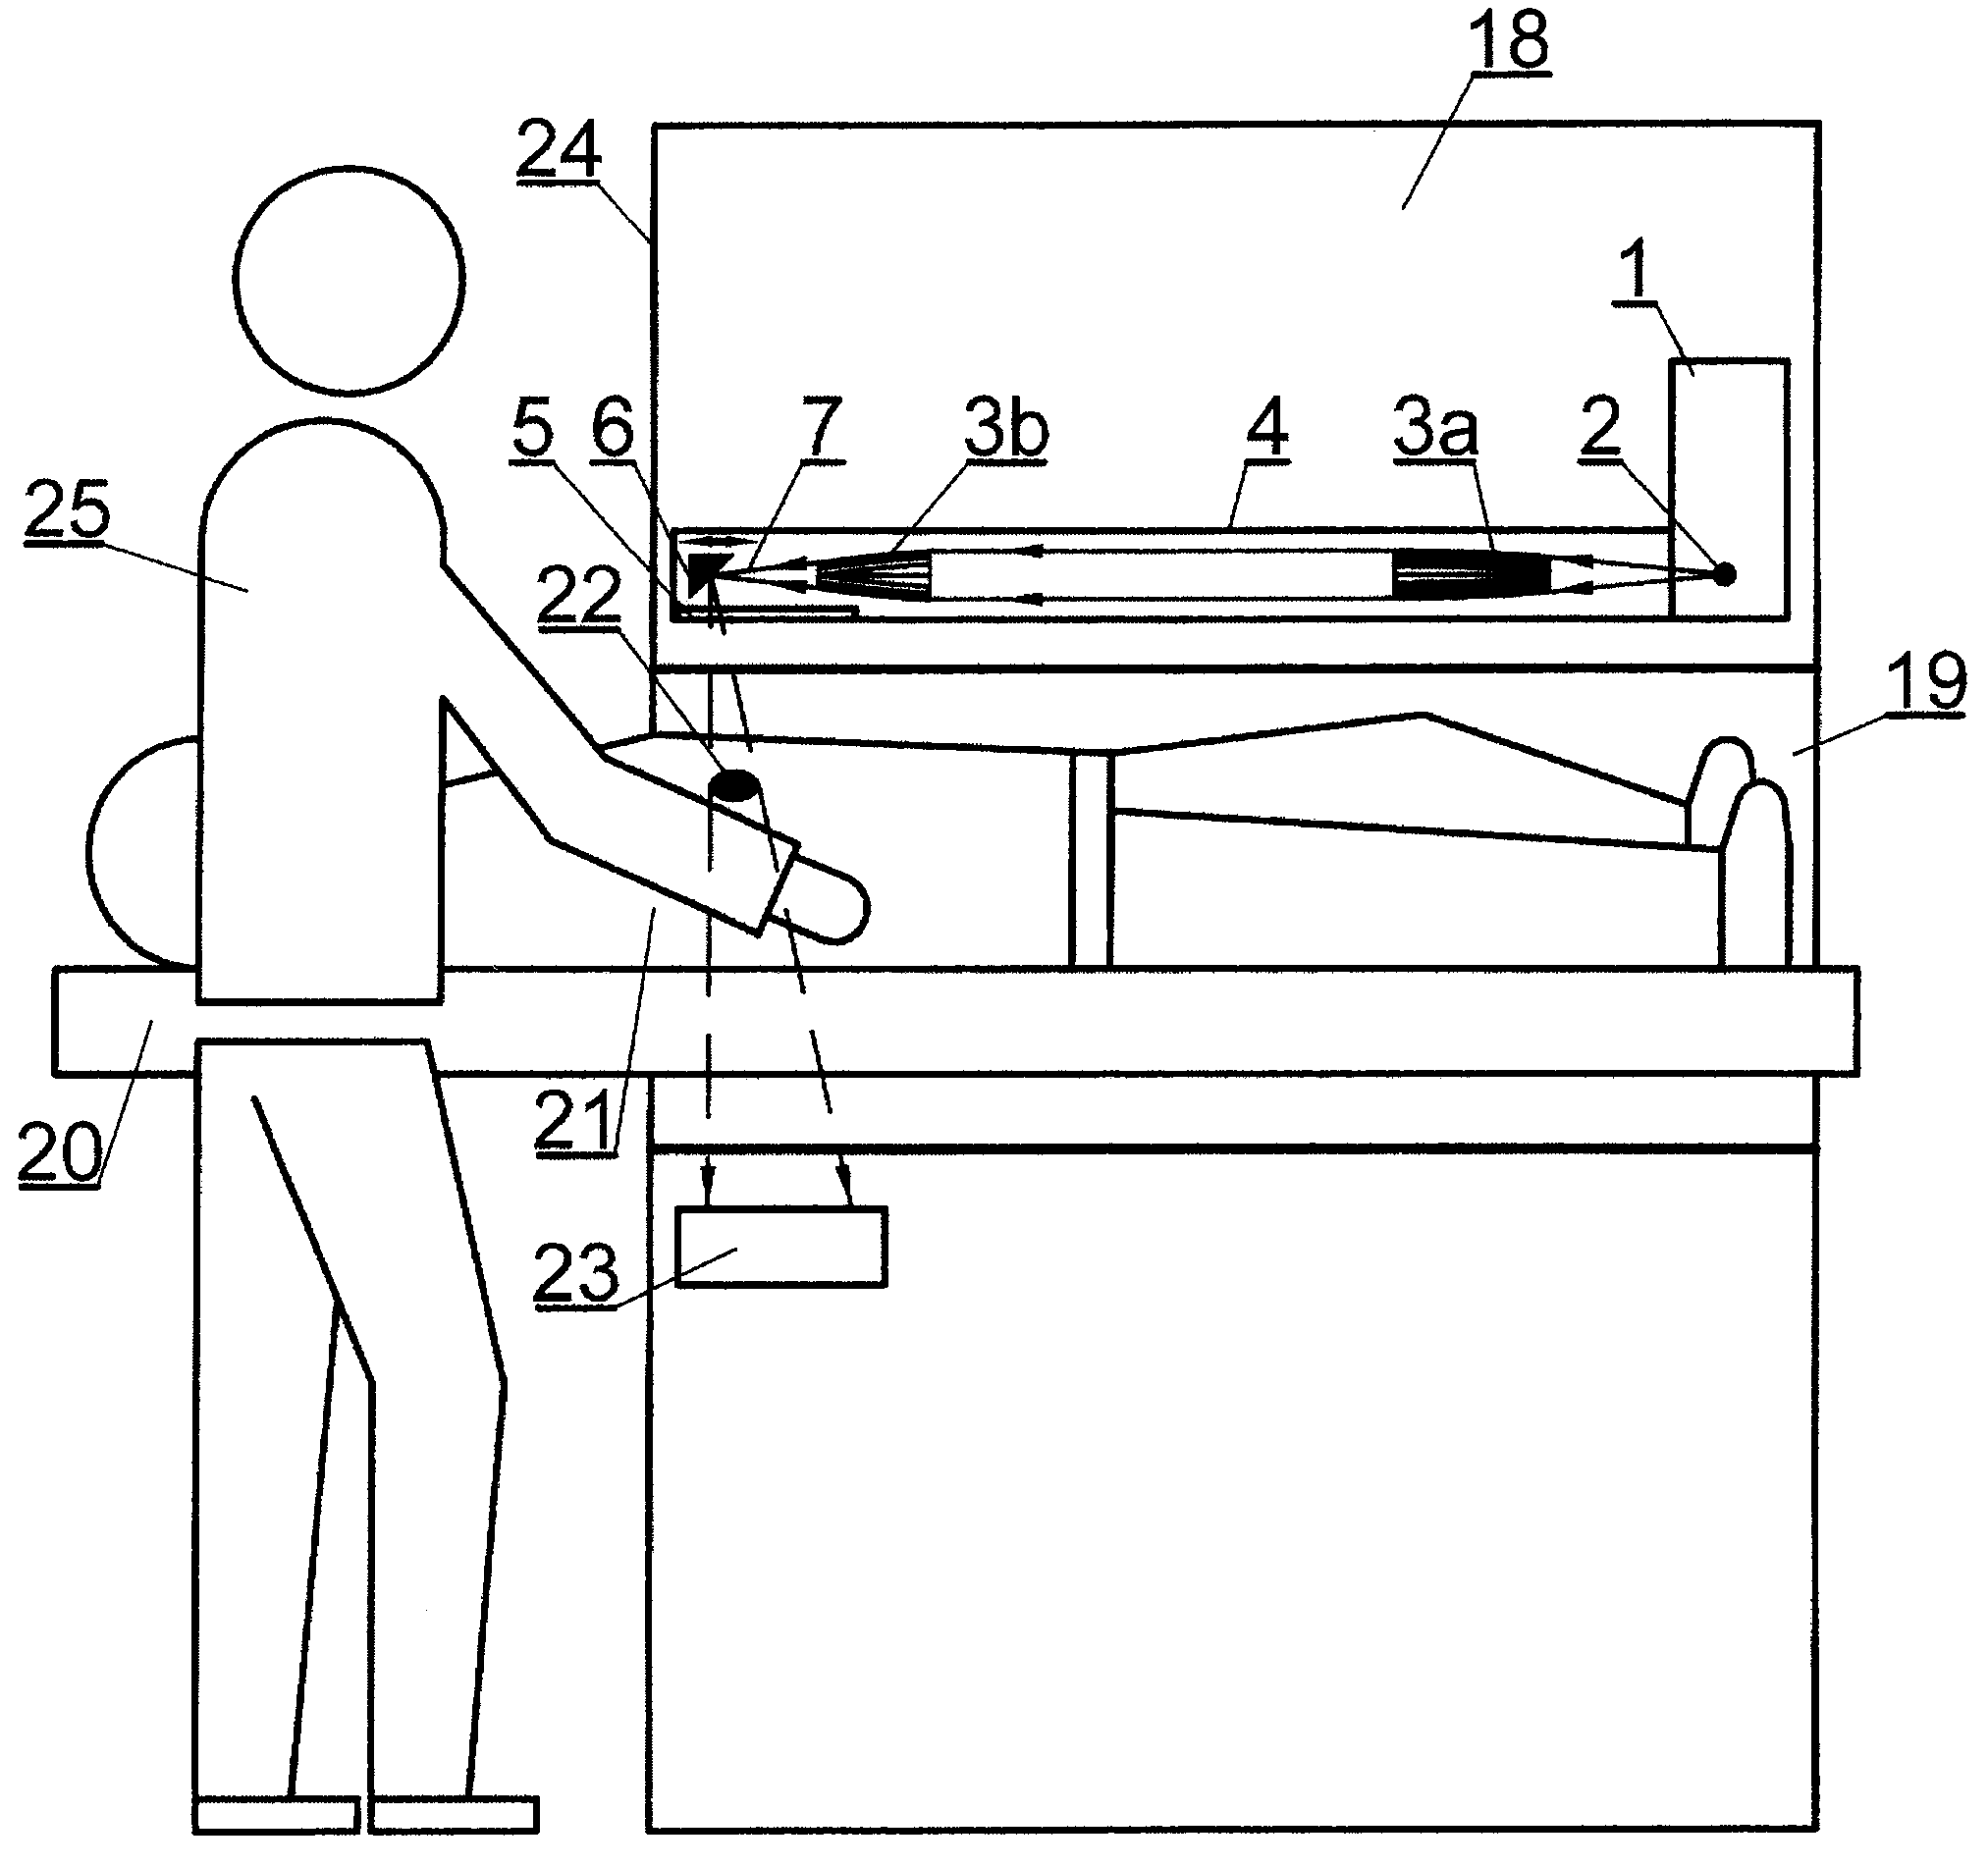 X-ray imaging apparatus and method for mammography and computed tomography